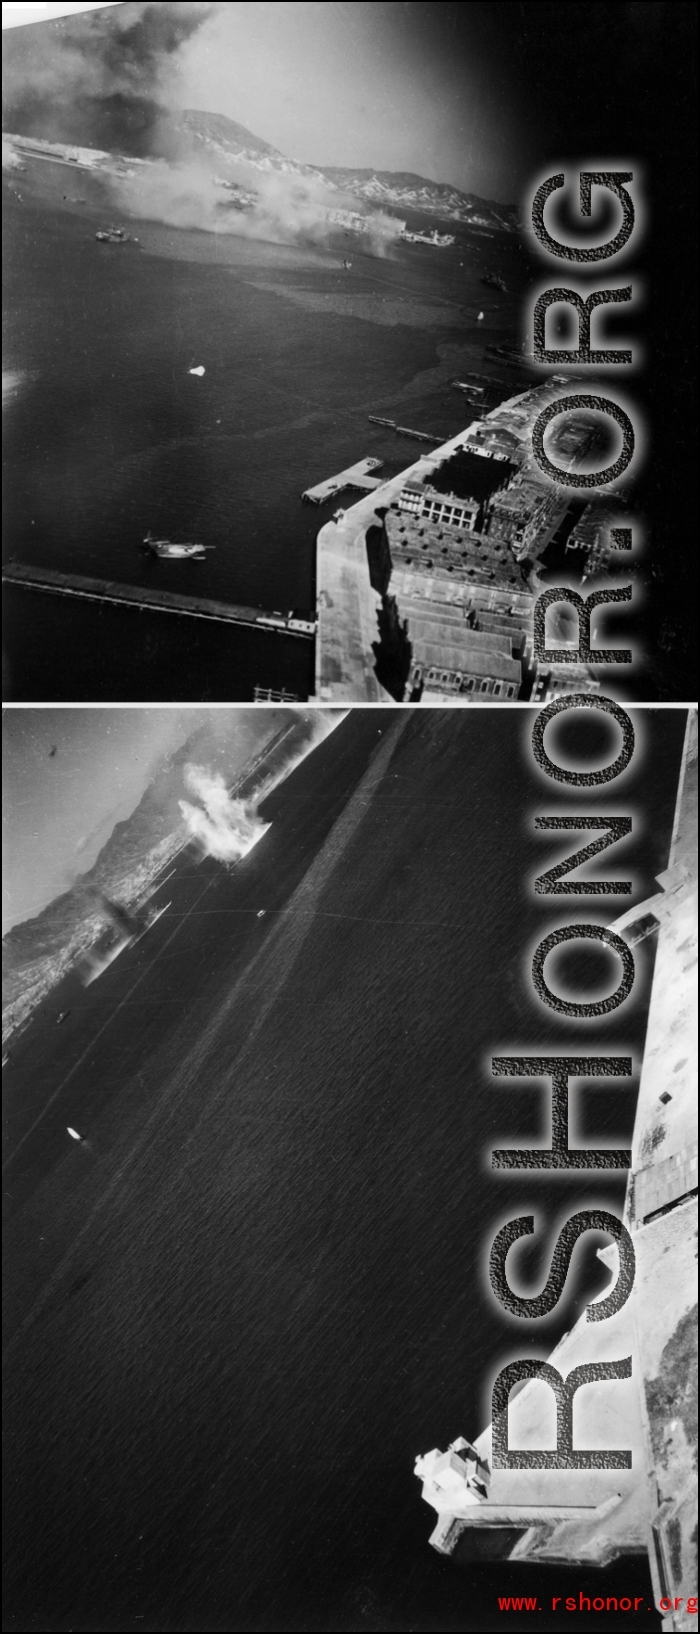 Photos of close-in bombing. From a mission on Hong Kong, 491st Bomb Squadron. 